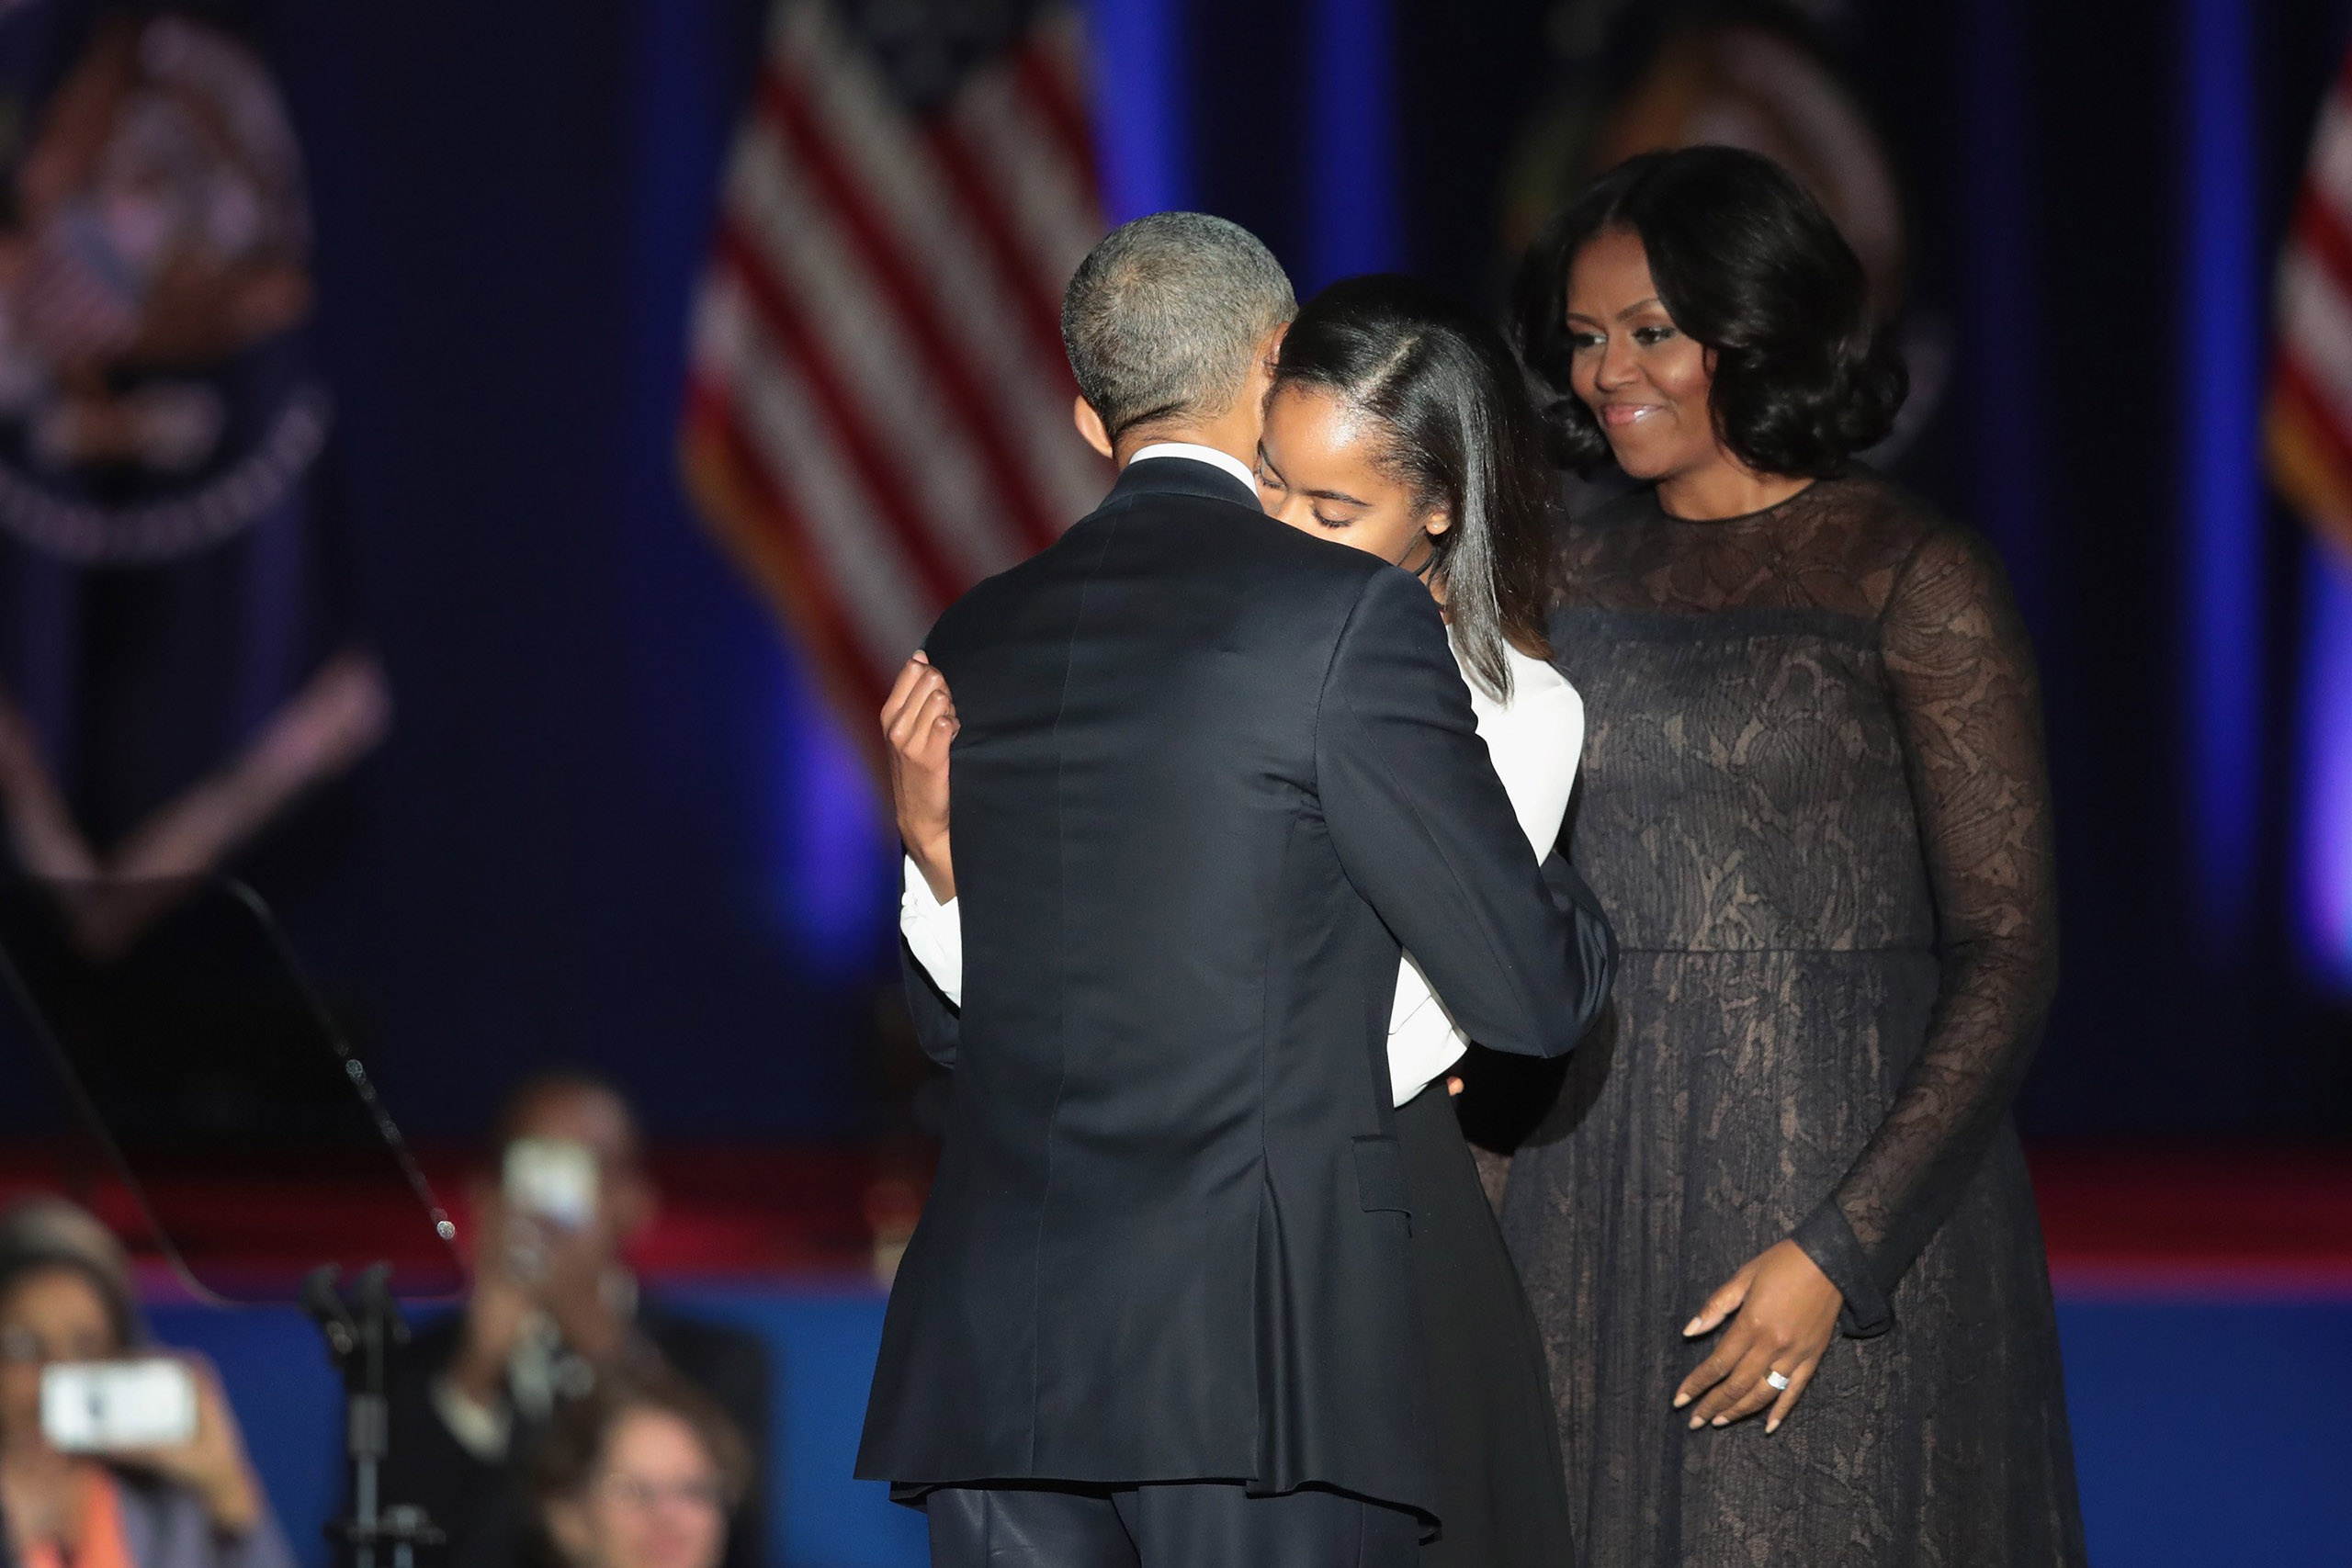 President Obama hugs his daughter Malia following his farewell speech to the nation in Chicago, on Jan. 10, 2017.